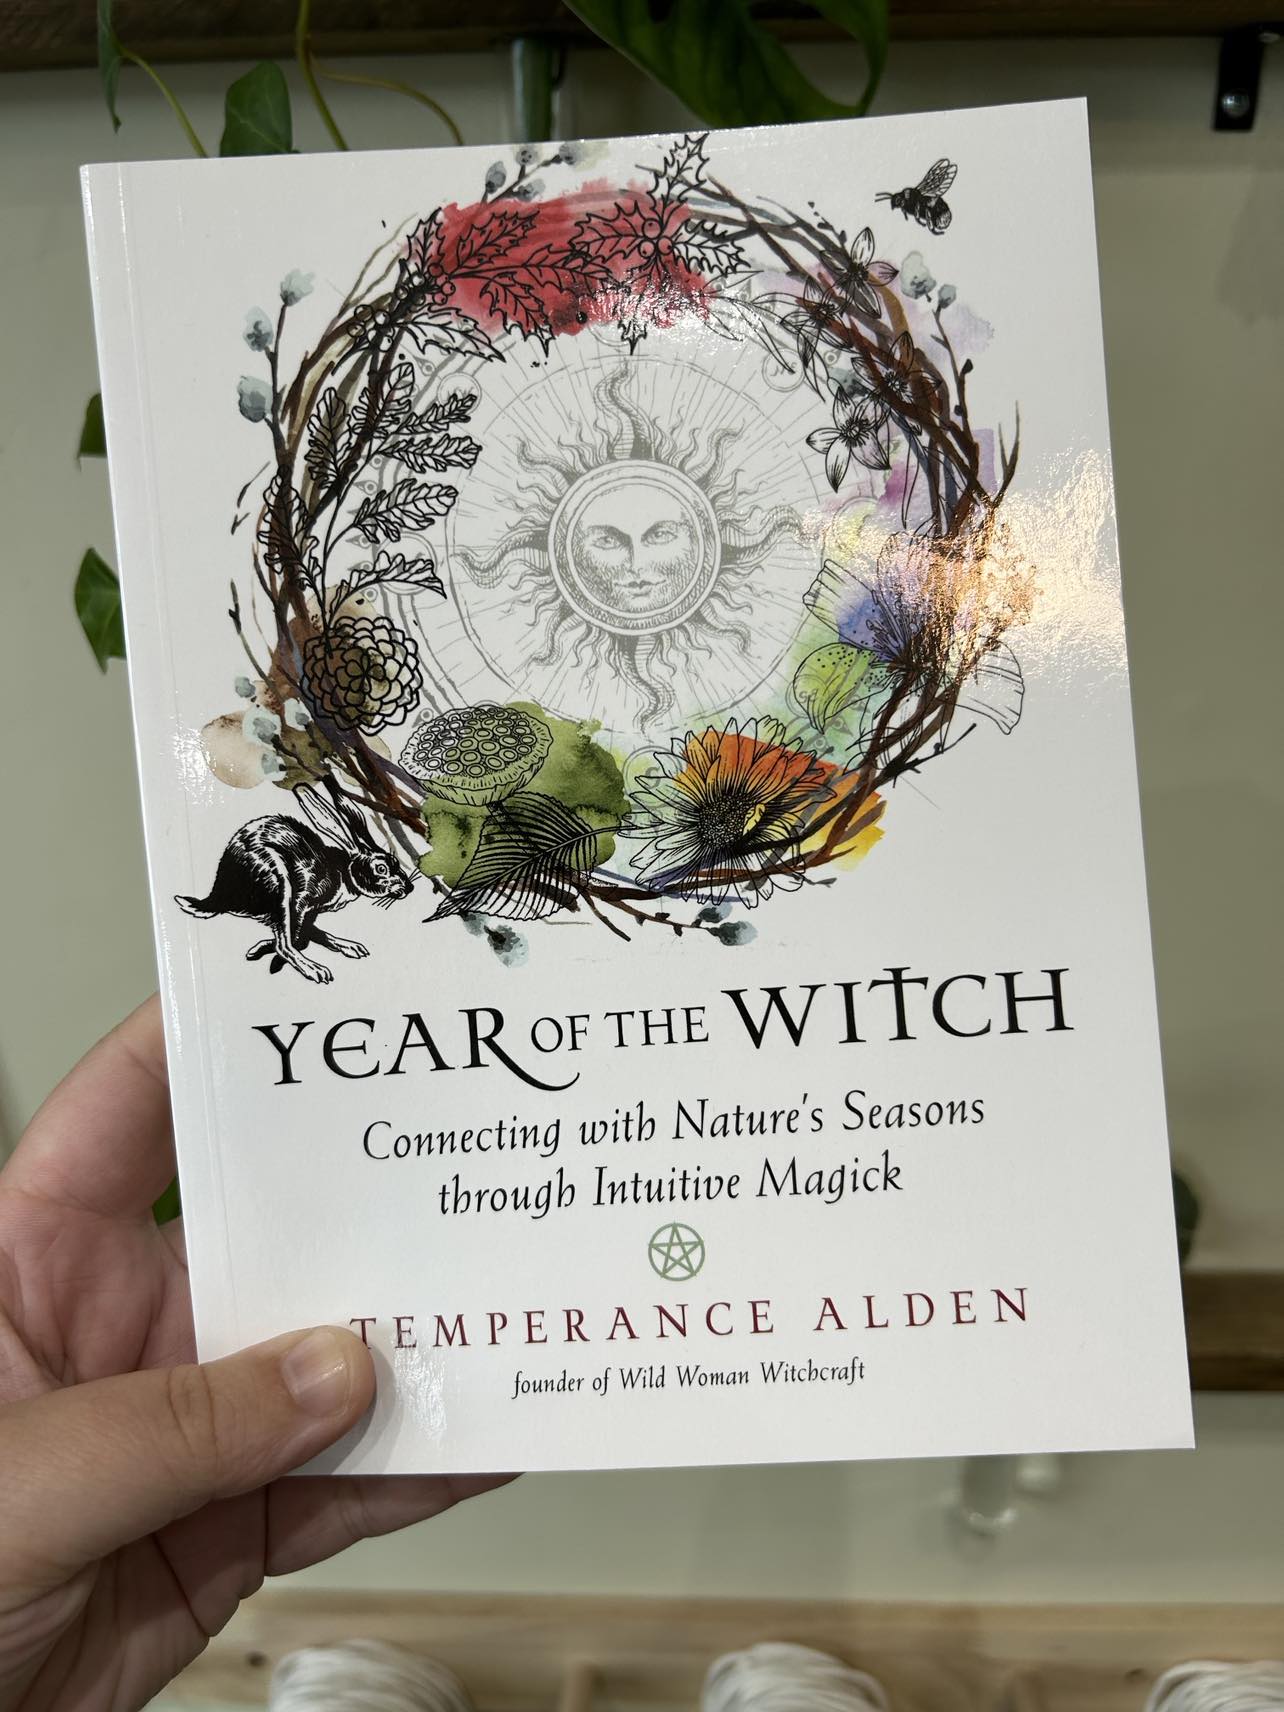 Year of the witch by Temperance Alden